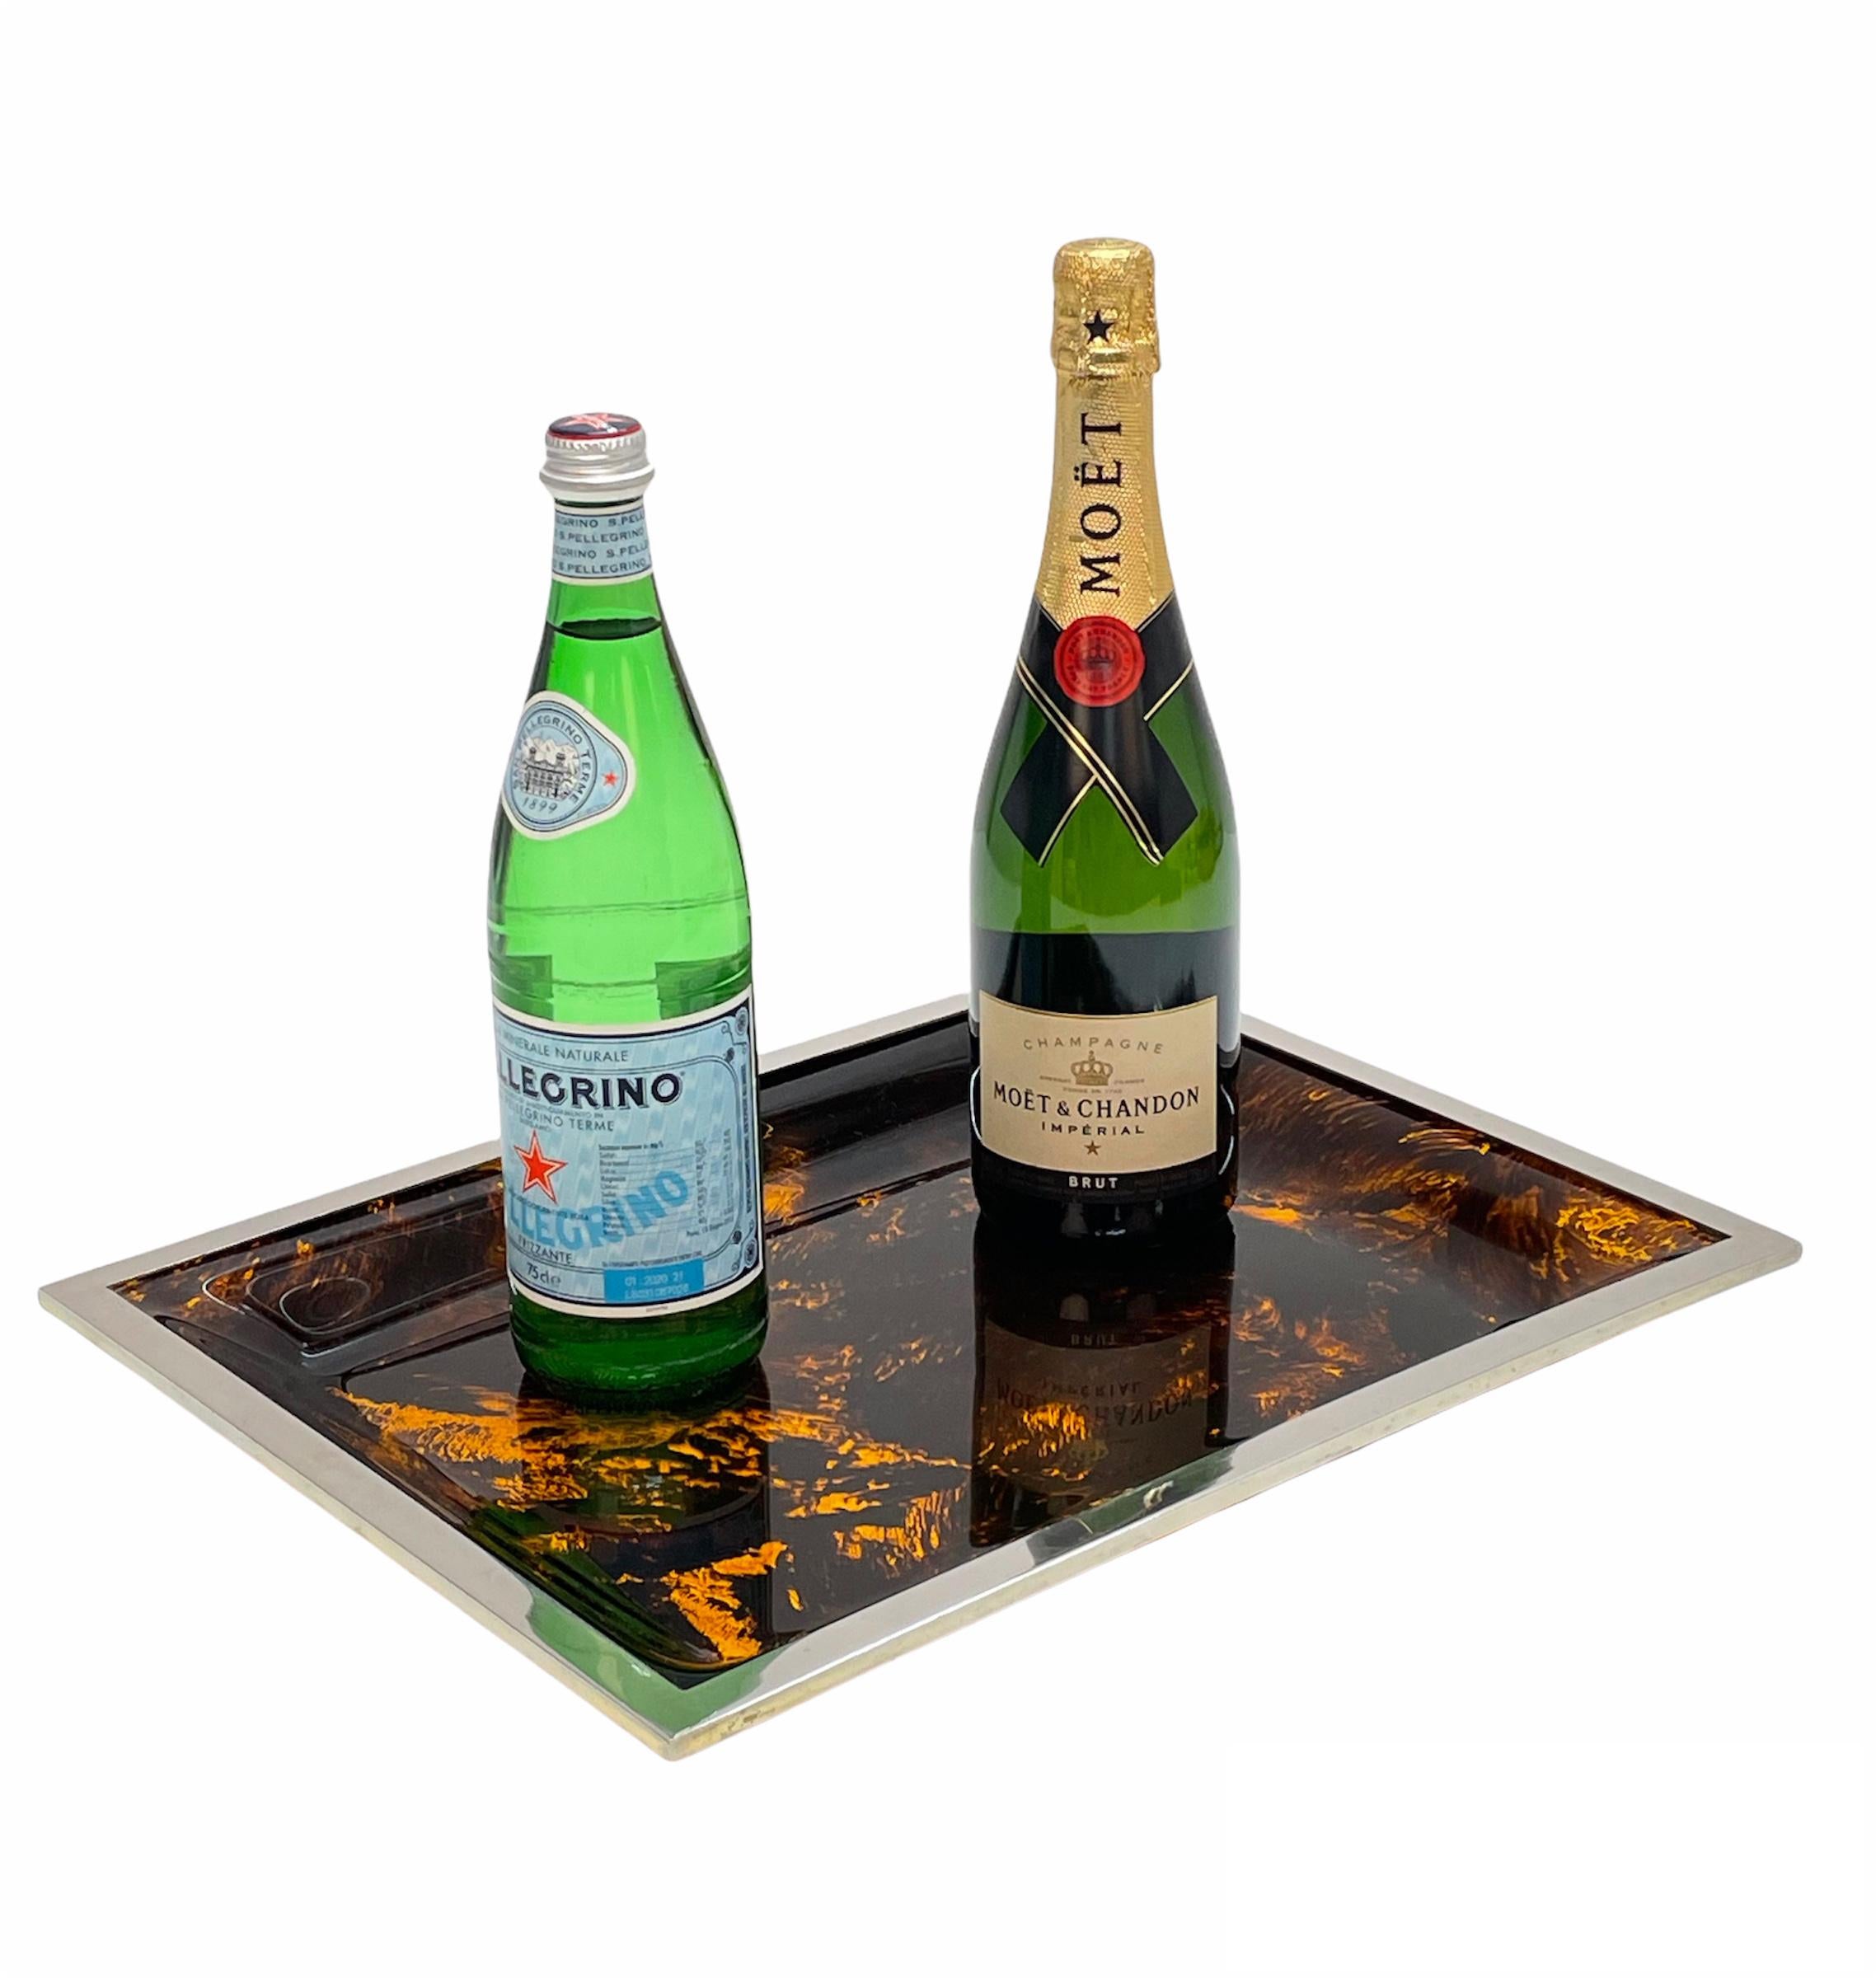 Midcentury Tortoiseshell Plexiglass Italian Serving Tray after Willy Rizzo 1970s For Sale 9